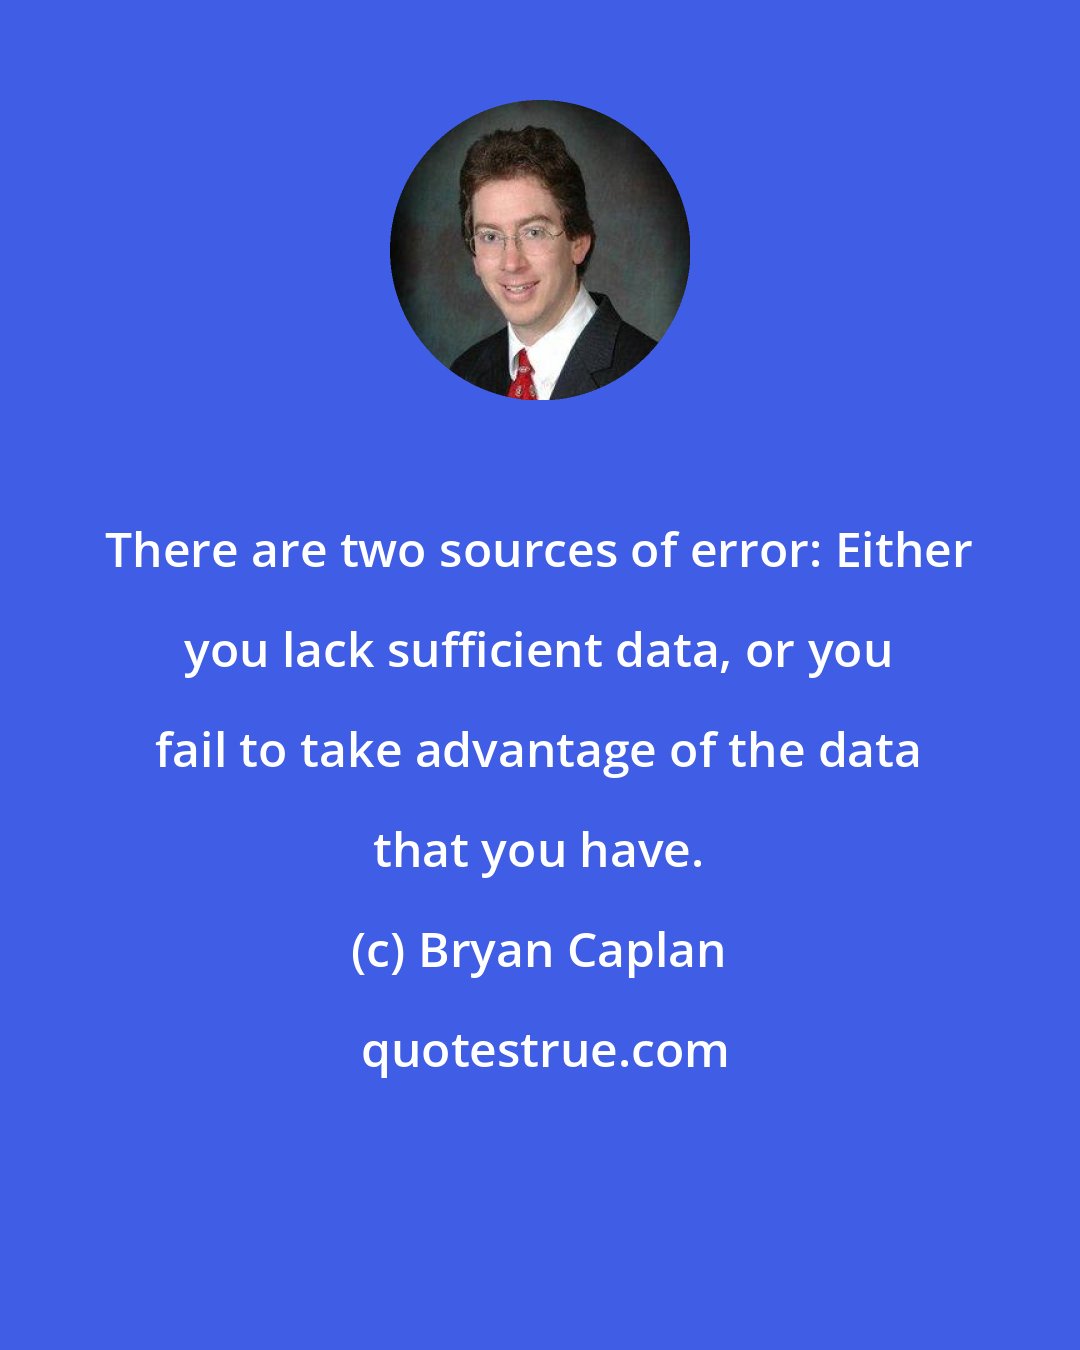 Bryan Caplan: There are two sources of error: Either you lack sufficient data, or you fail to take advantage of the data that you have.